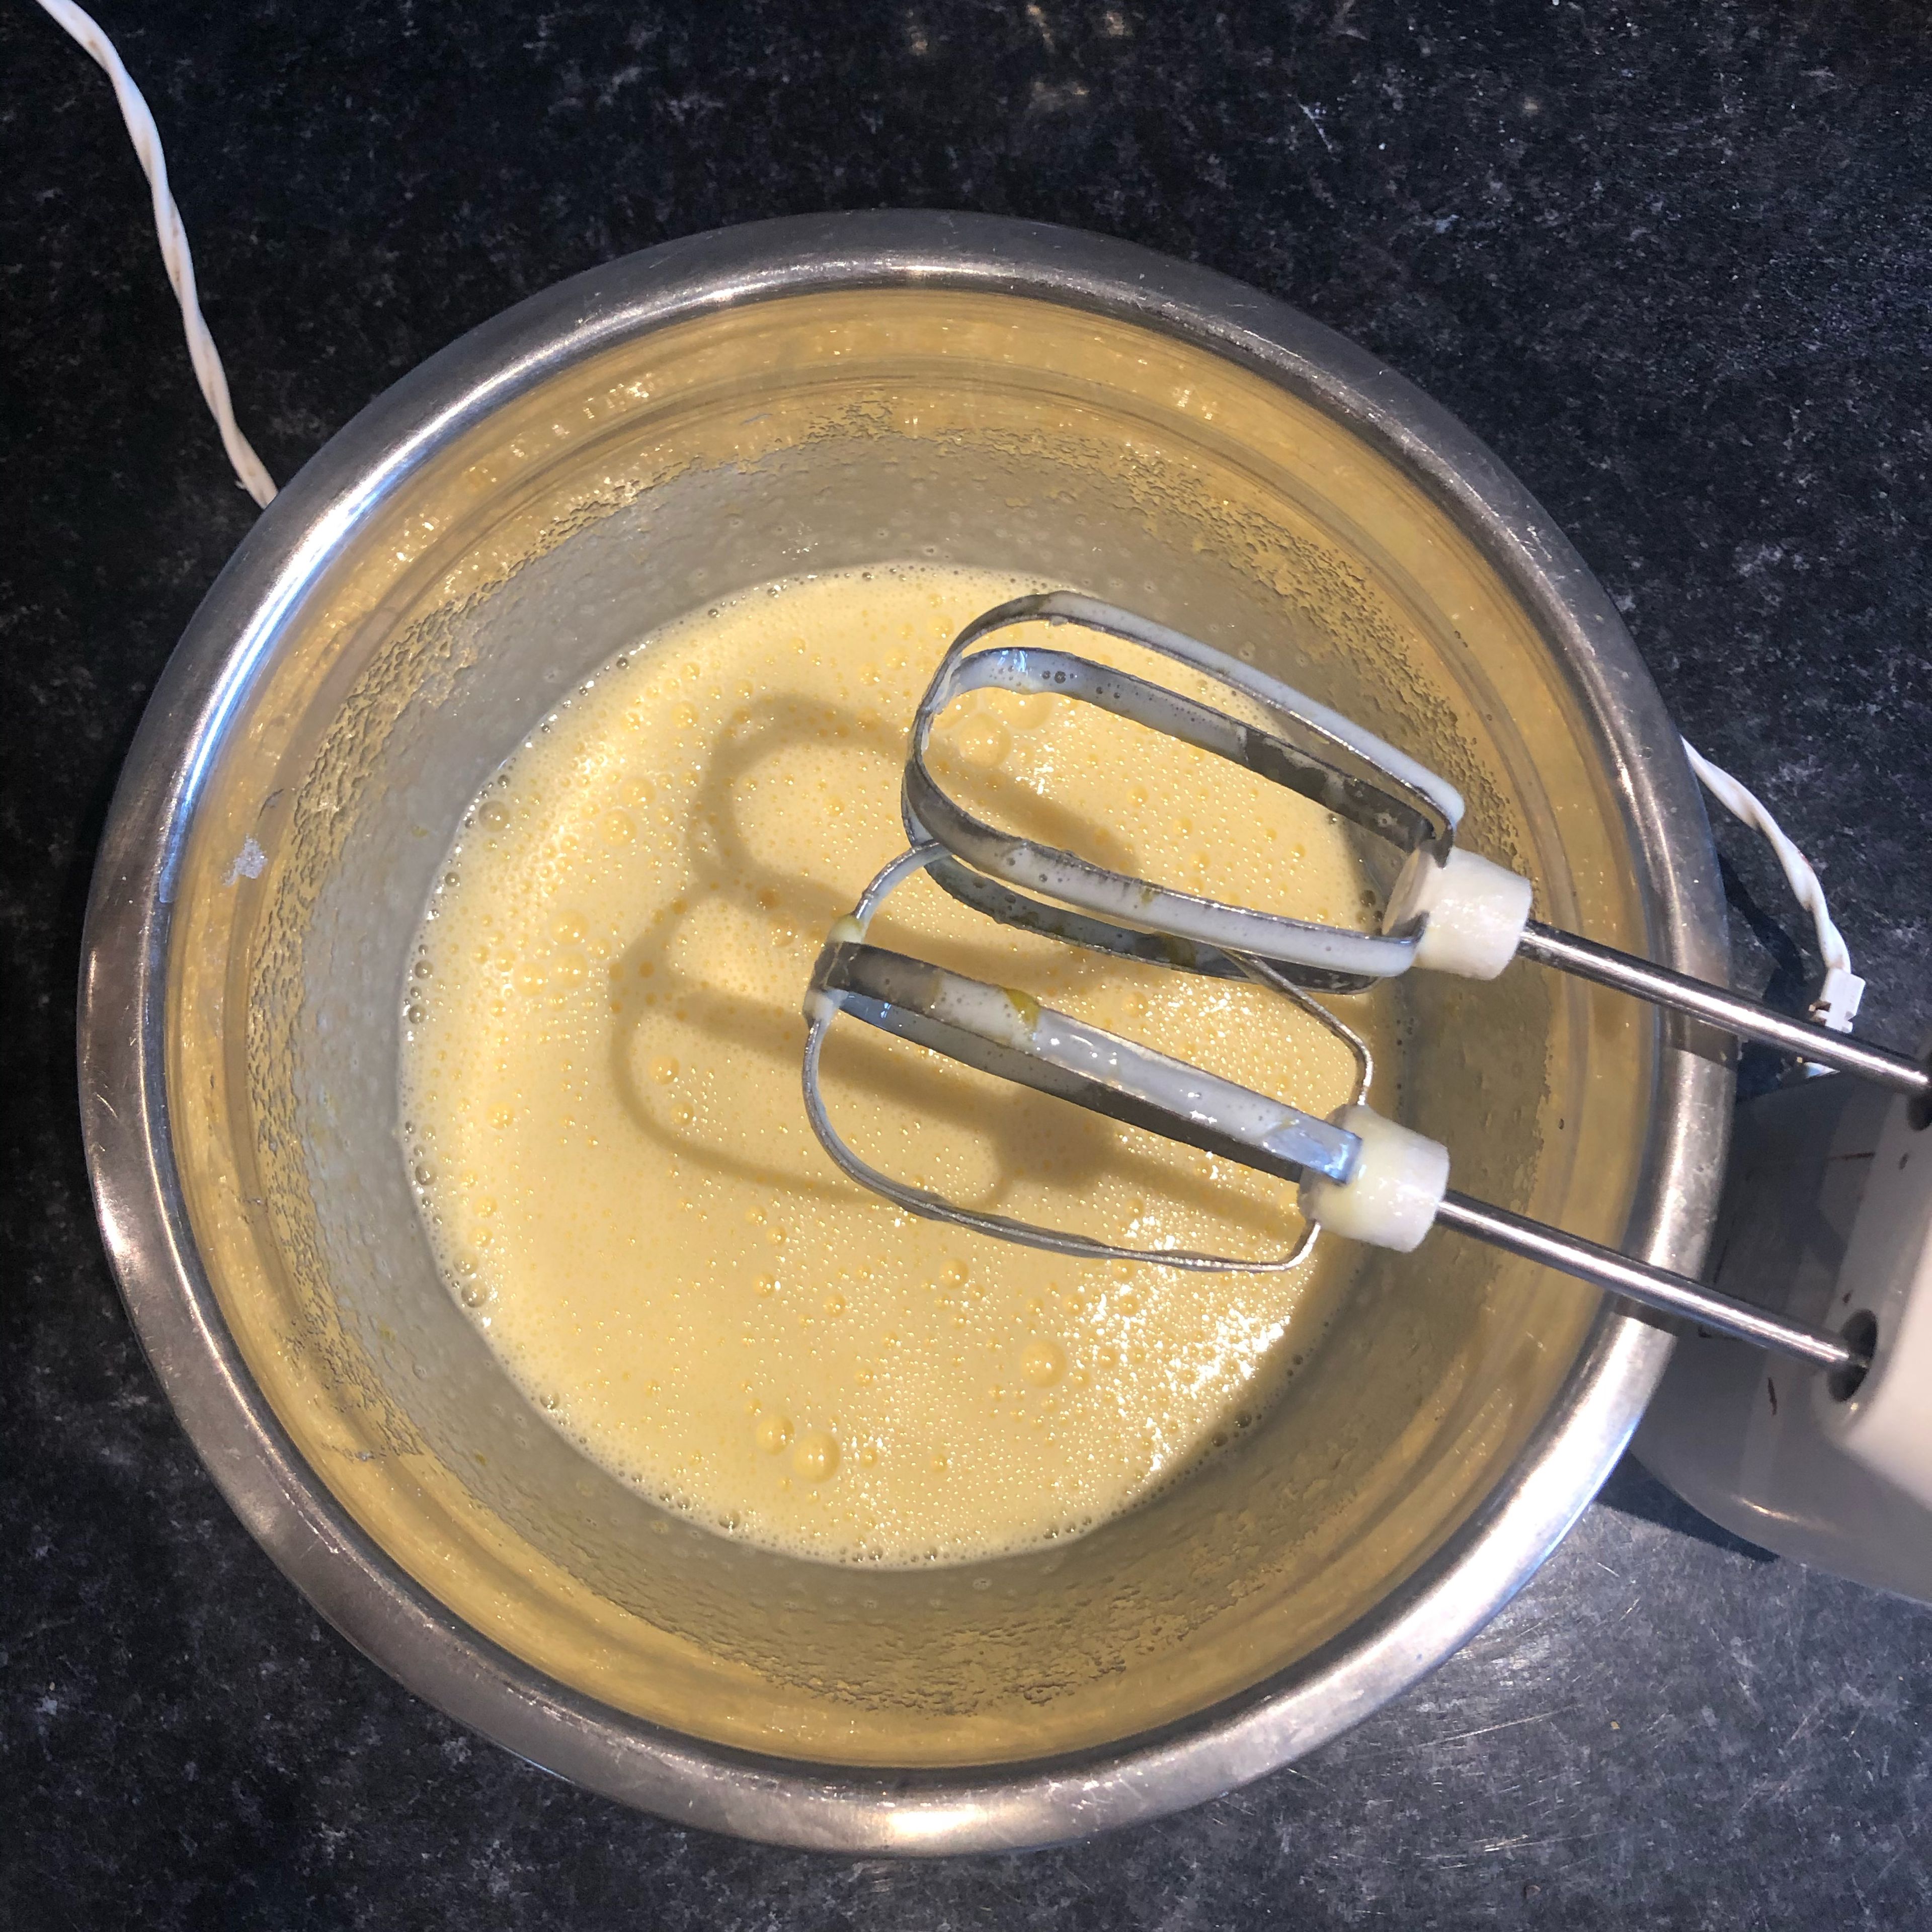 In a separate bowl, whisk together eggs and sugar until pale and light.